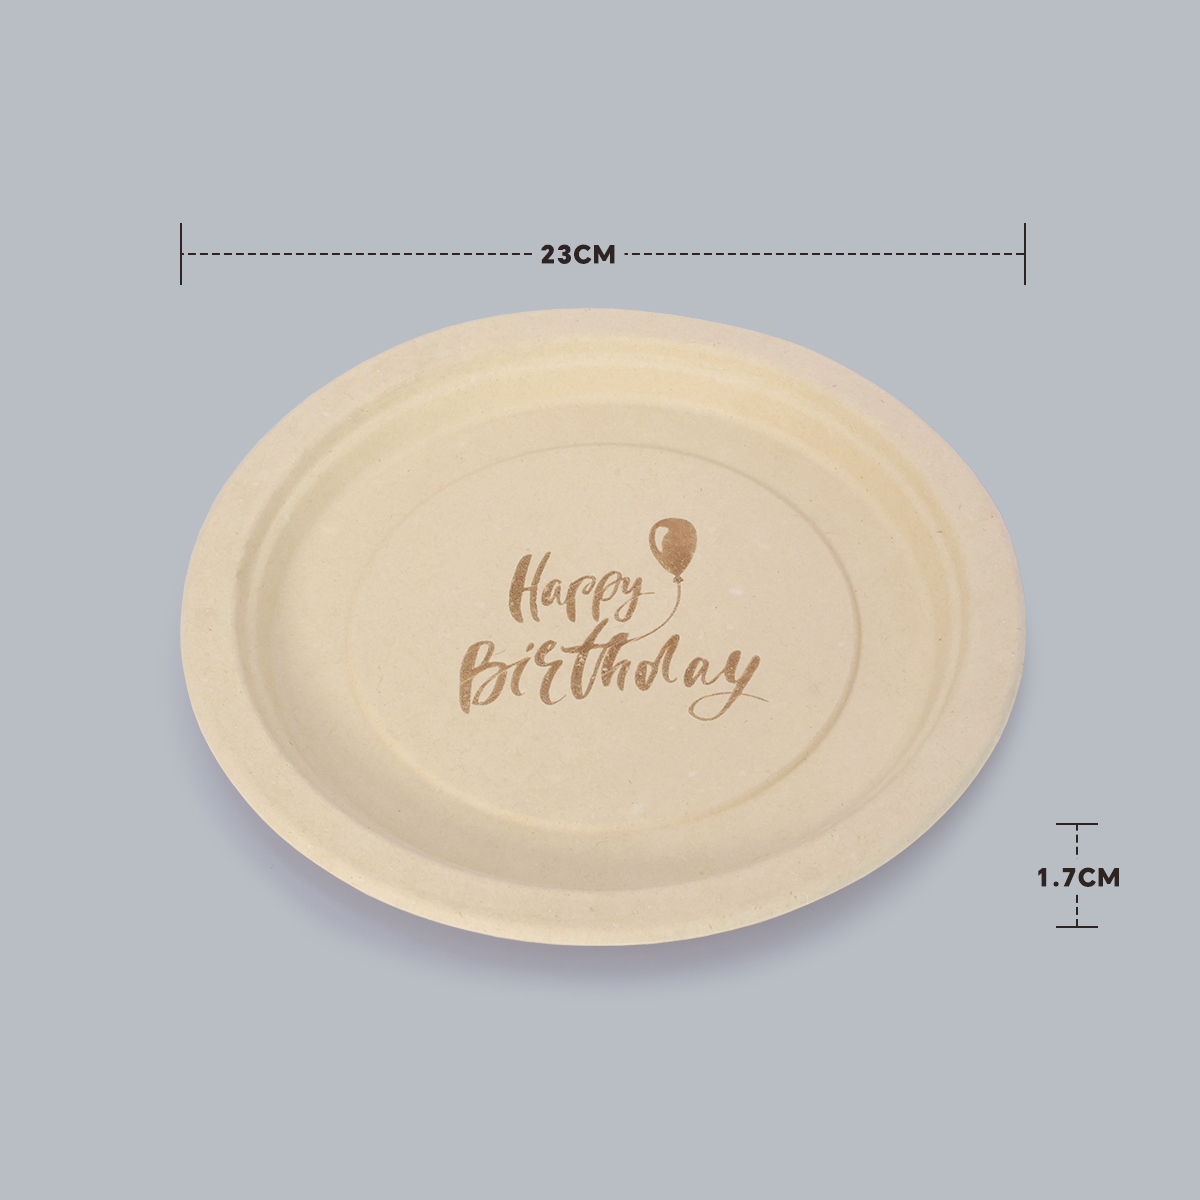 Compostable Food Trays Eco-Friendly Food Containers Eco-Friendly Plates